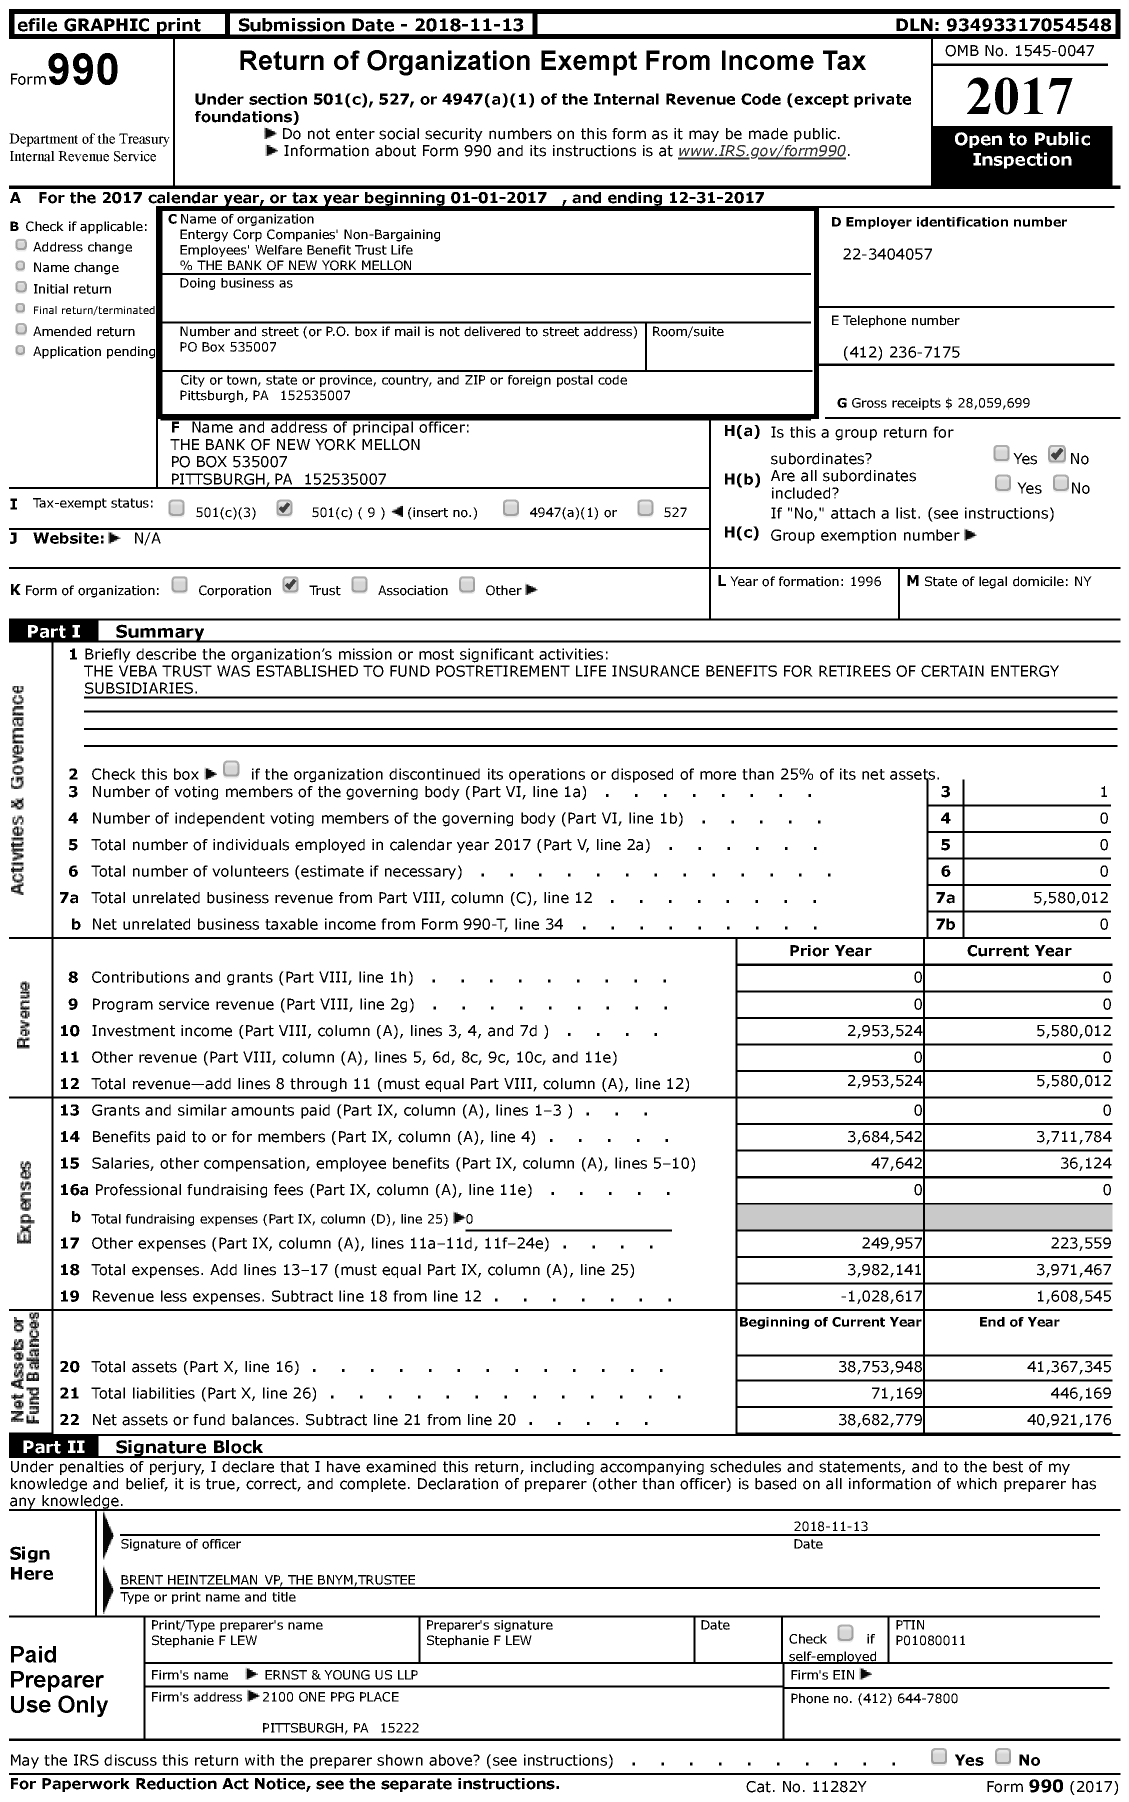 Image of first page of 2017 Form 990 for Entergy Corp Companies' Non-Bargaining Employees' Welfare Benefit Trust Life